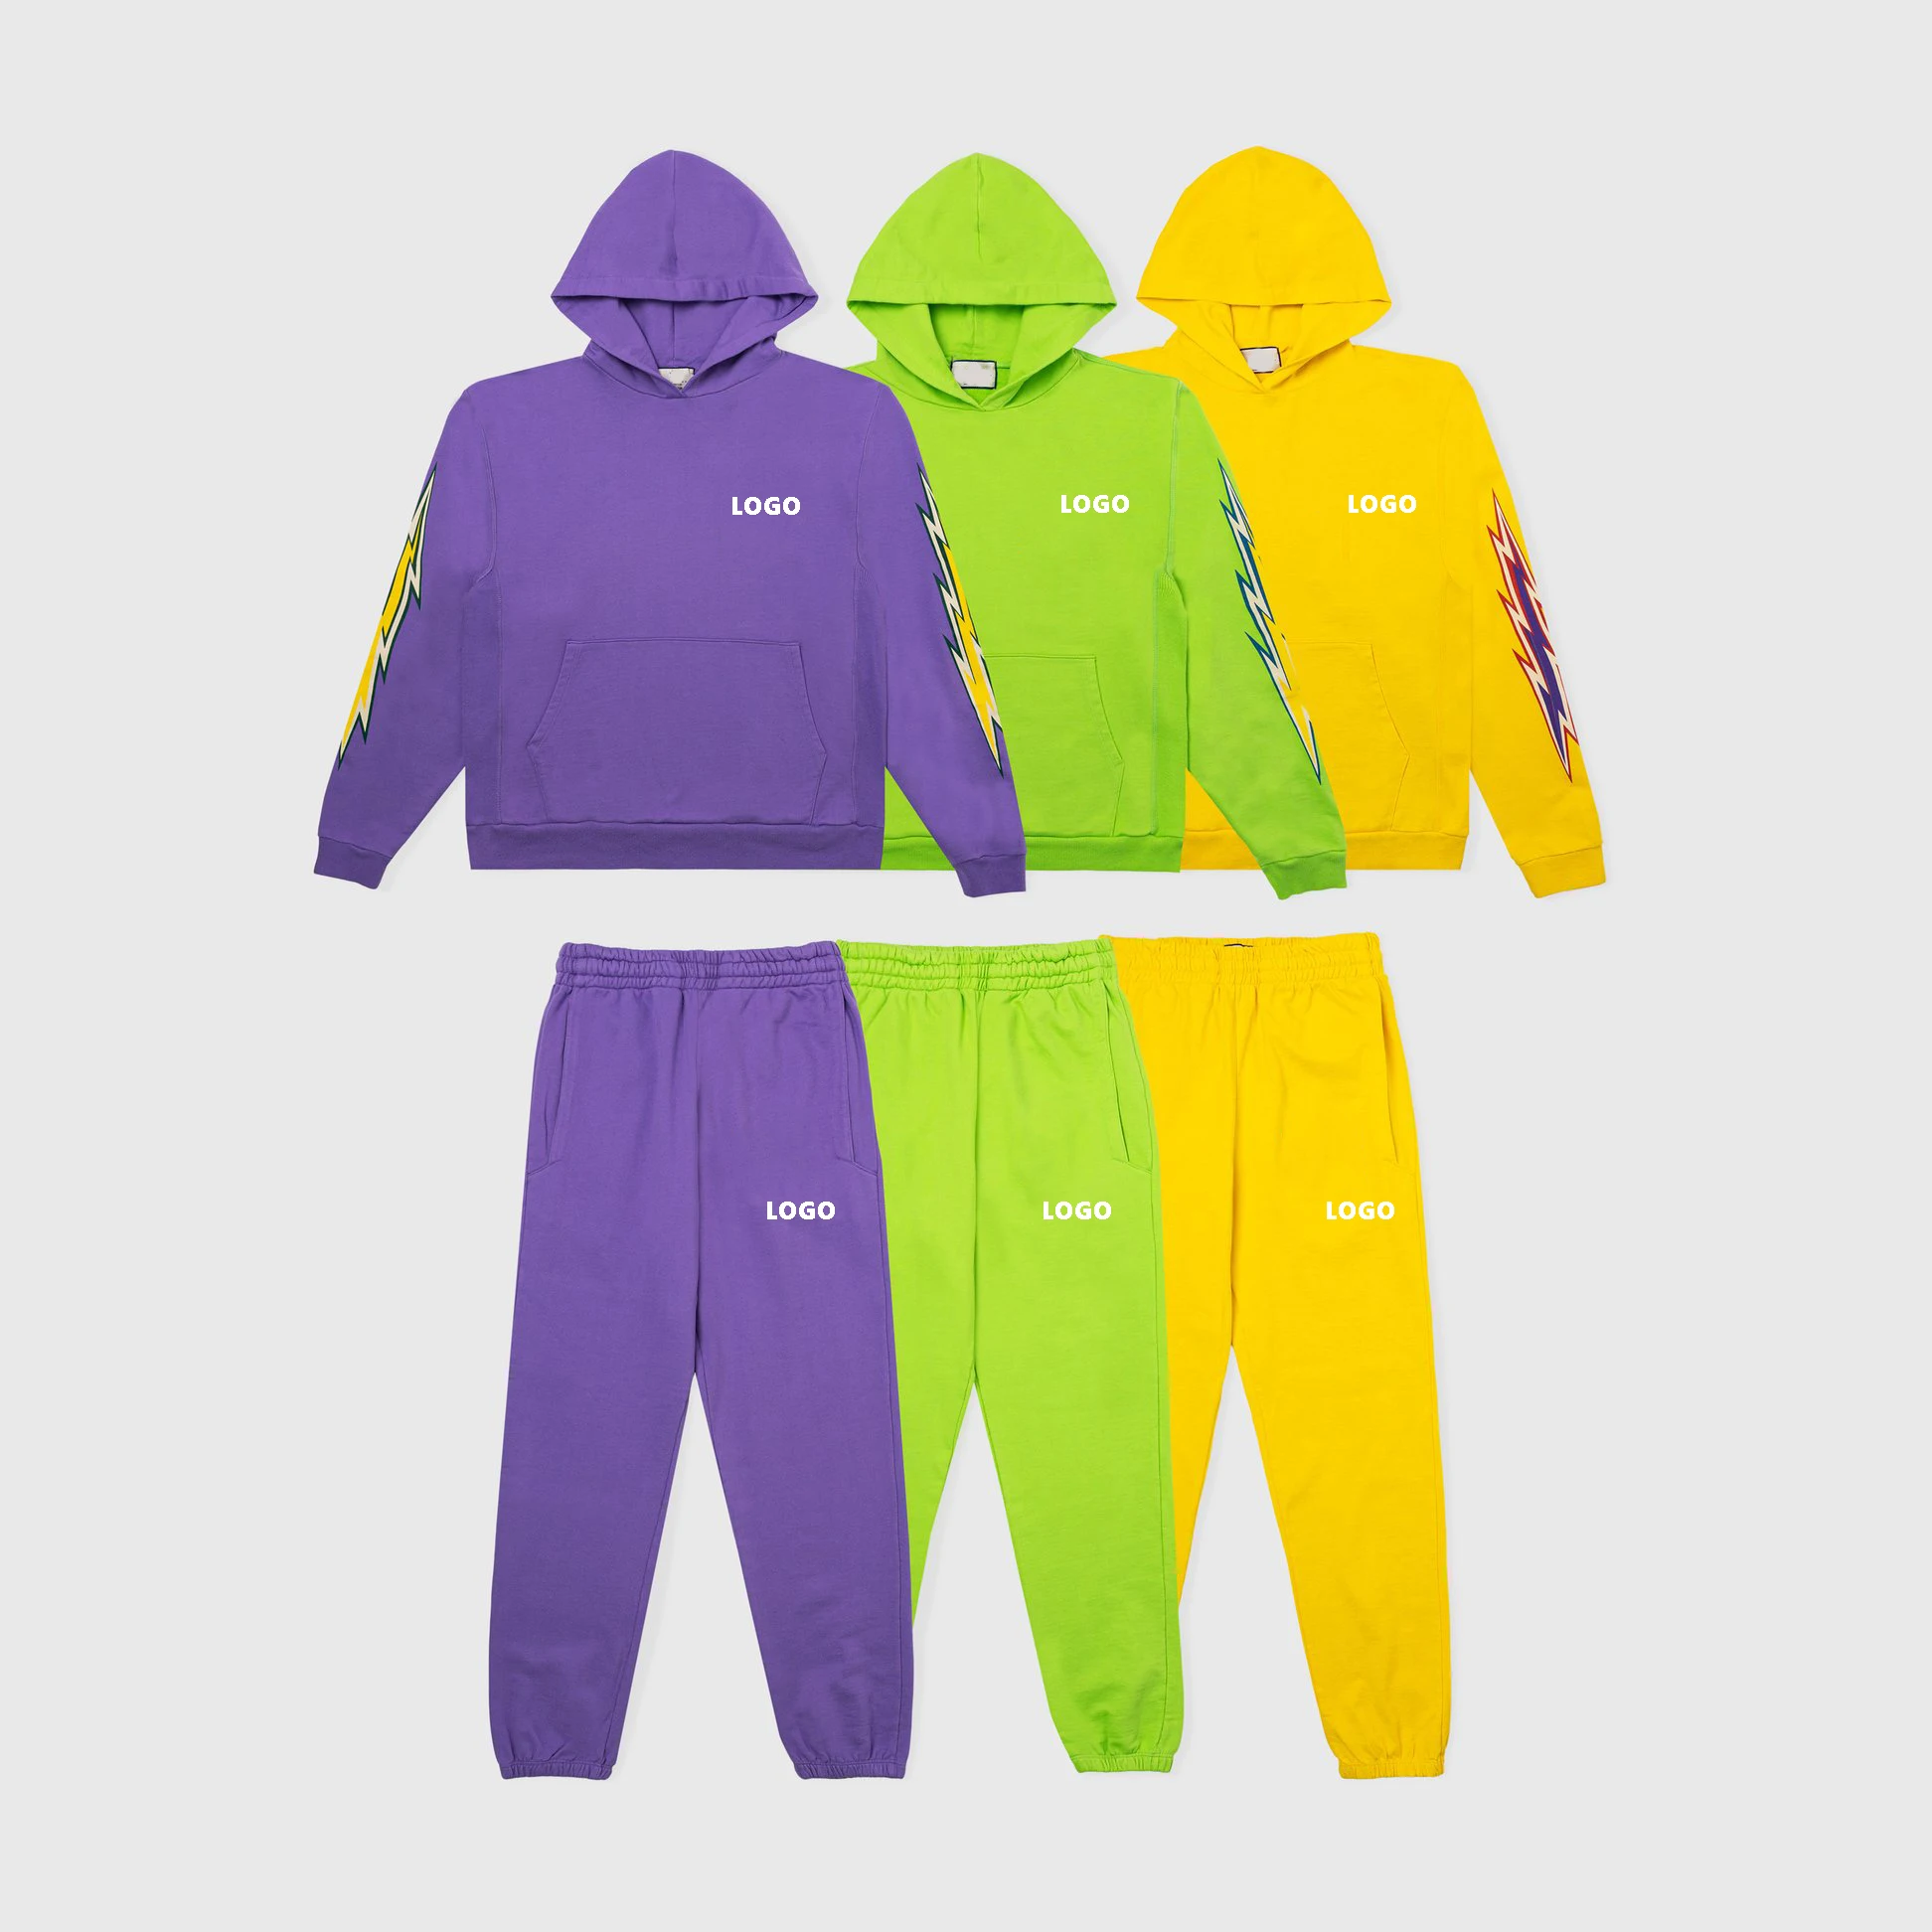 Wholesale Custom Printing Logo Cotton Unisex's Sweatpants And Hoodies Set  Oem Winter Solid Color Pullover Jumper Blank Hoodie With Pocket From  m.